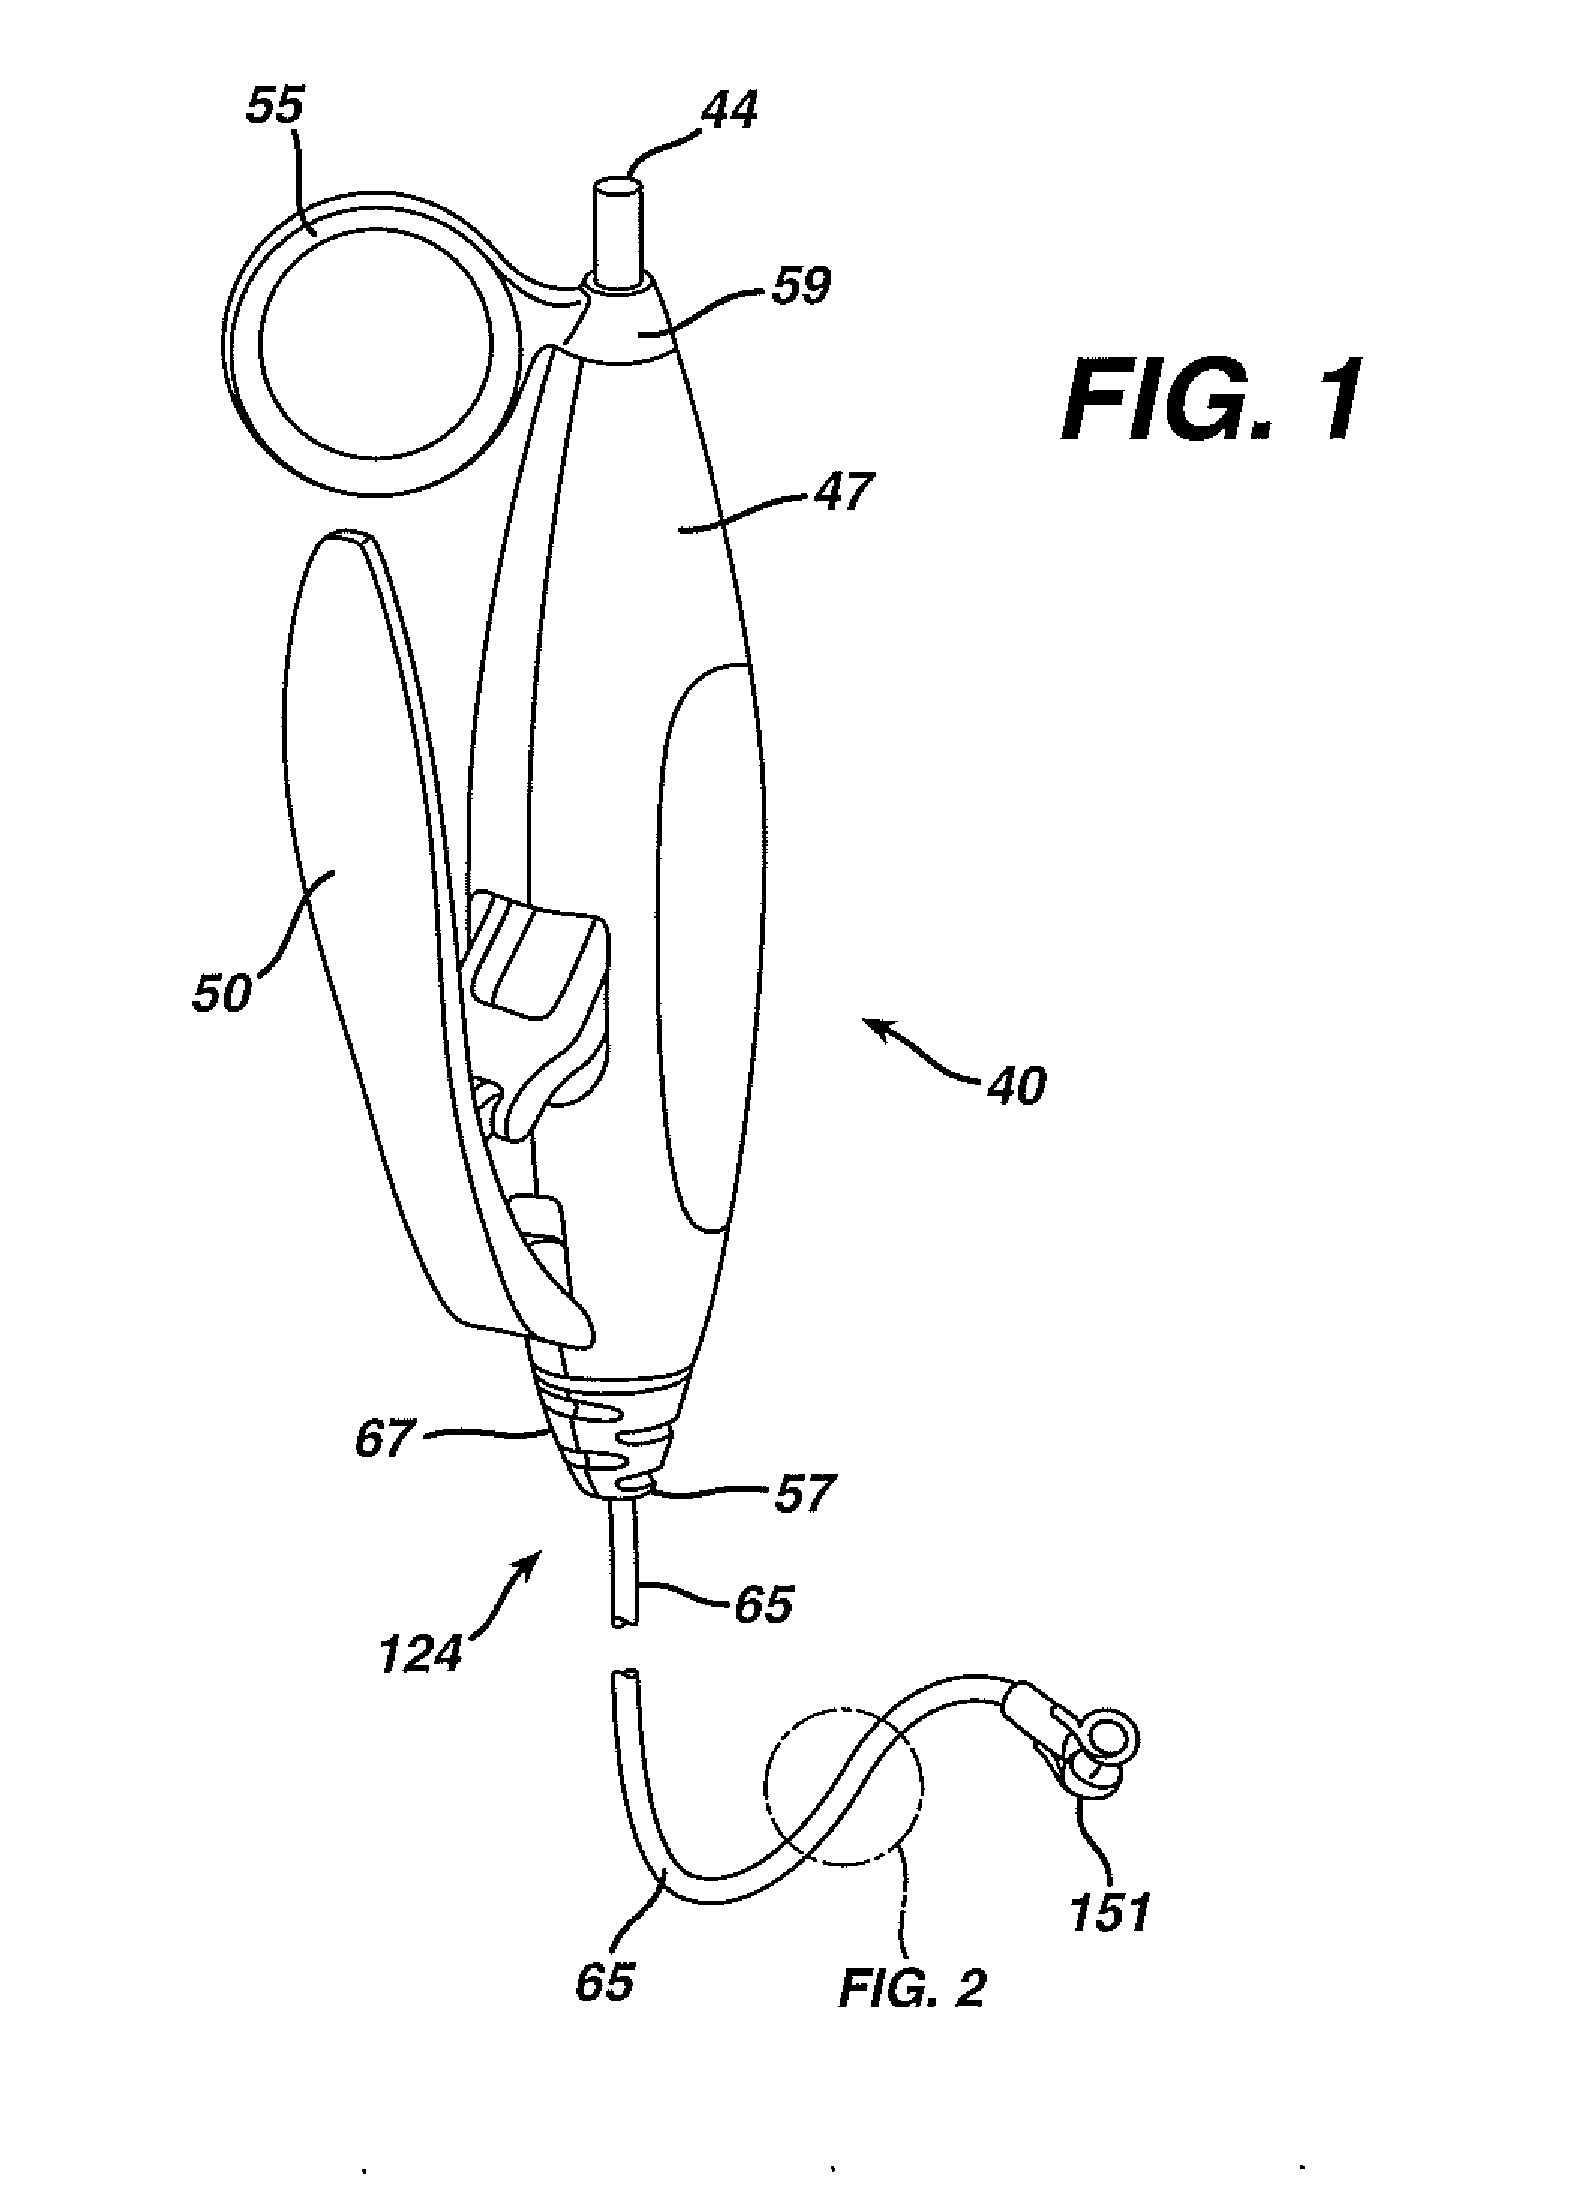 Actuation Apparatus and Method